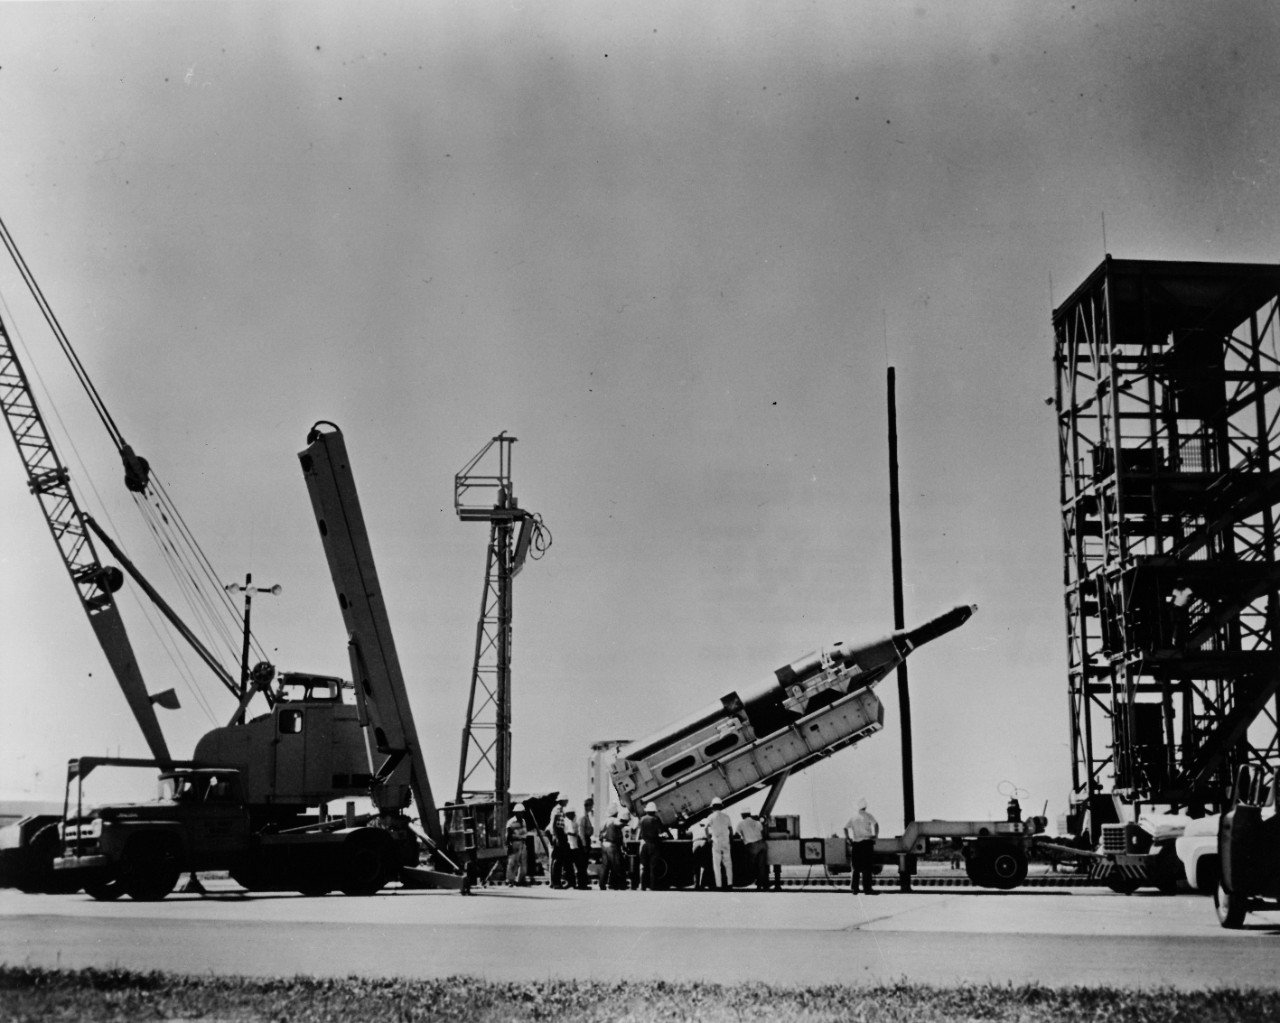 <p>L55-15.02.15 Polaris Missile Test Vehicle being loaded onto launching pad.</p>
